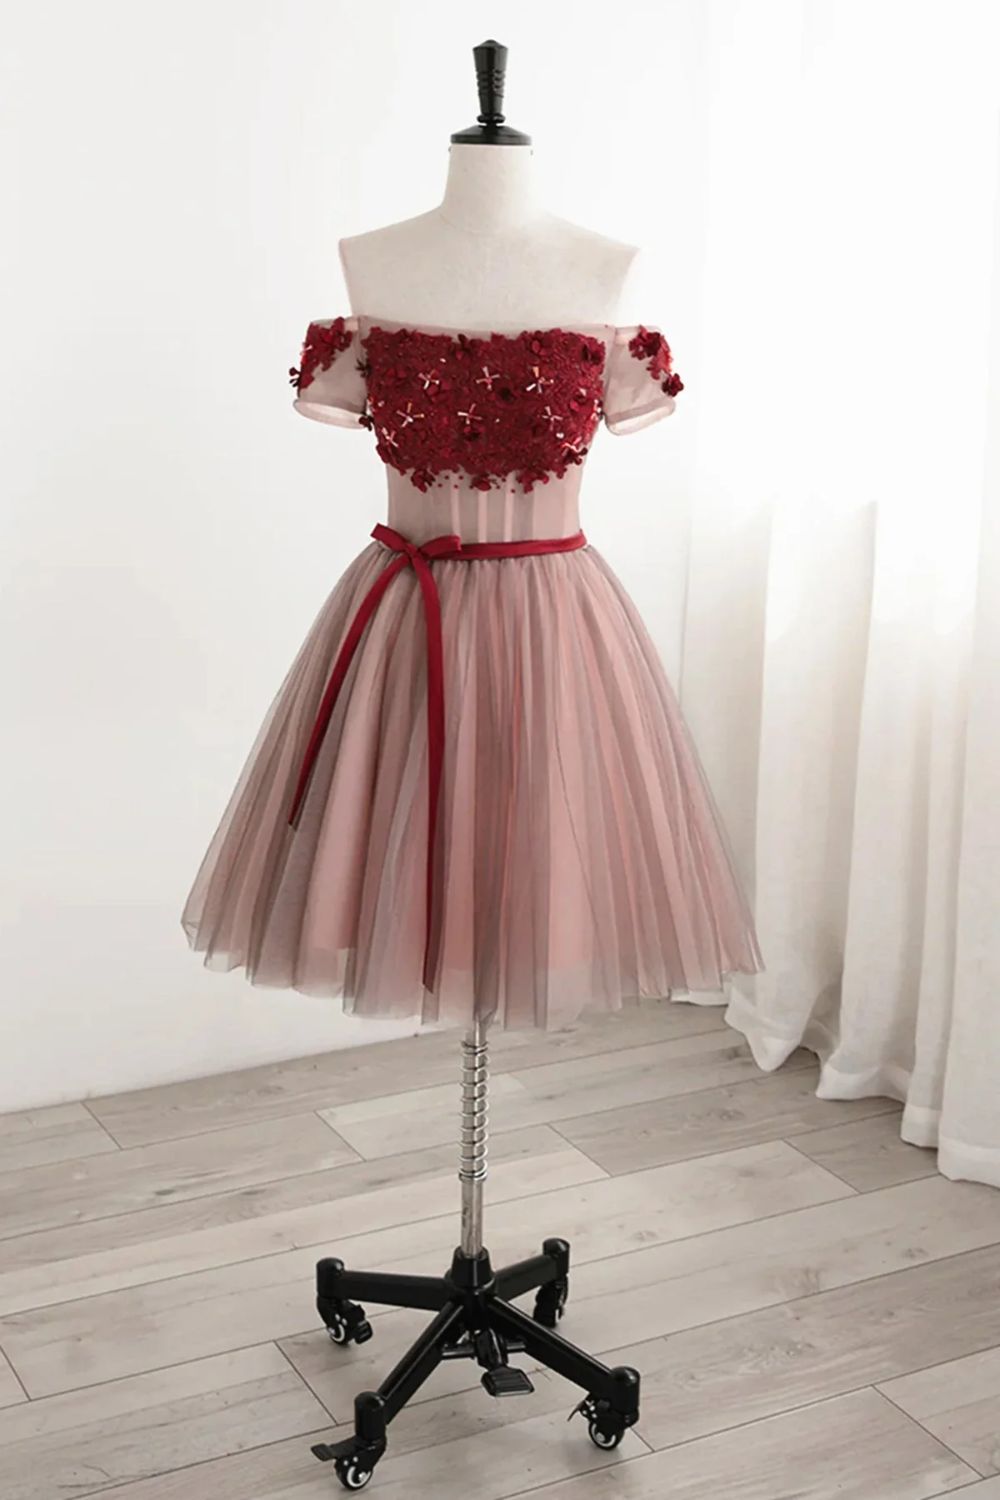 Dressime A Line Off the Shoulder Flowers Tulle Short Homecoming Dresses